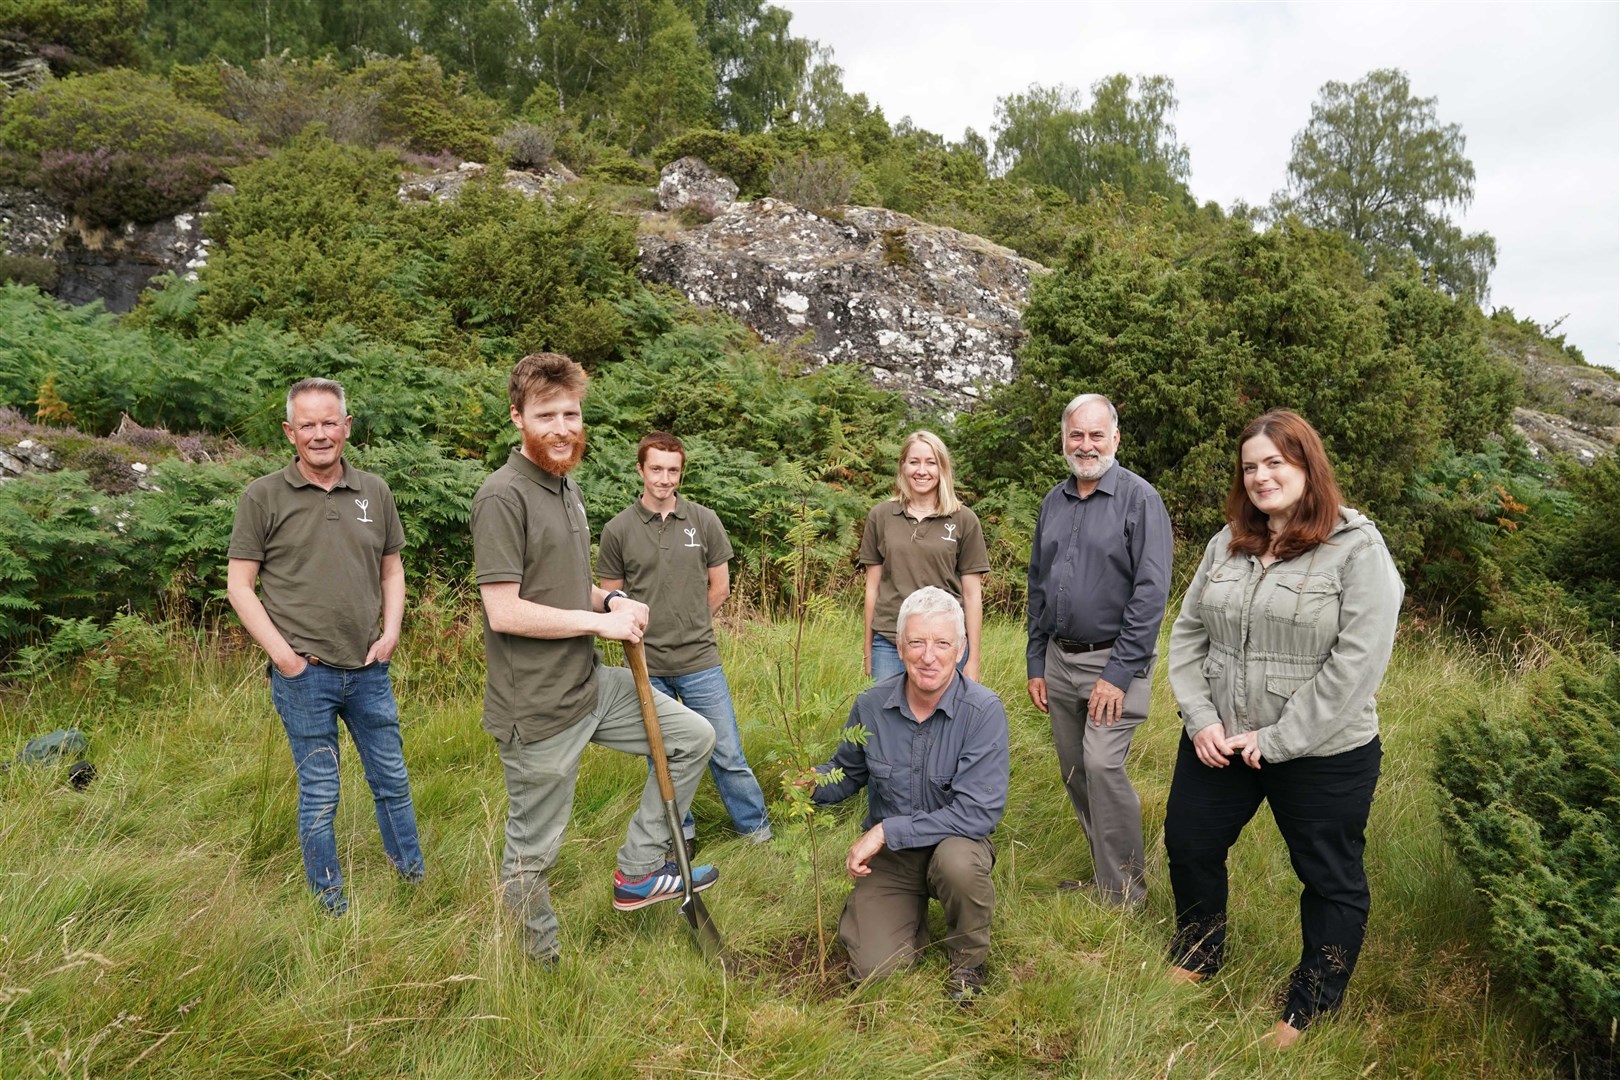 Official breaking of ground to mark the beginning of the construction of the world’s first rewilding centre at Trees for Life’s 10,000-acre Dundreggan estate near Loch Ness. Dundreggan breaking ground(left to right): Trees For Life CEO Steven Micklewright, Trees for Life trainees Angus Crawley and Grymmsy Robinson planting the Rowan tree, Kat Murphy, rewilding centre education manager, Doug Gilbert the Dundreggan operations manager, Roddy Maclean, Laurelin Cummins-Fraser, director of the Dundreggan Rewilding Centre. Pictures: James MacKenzie